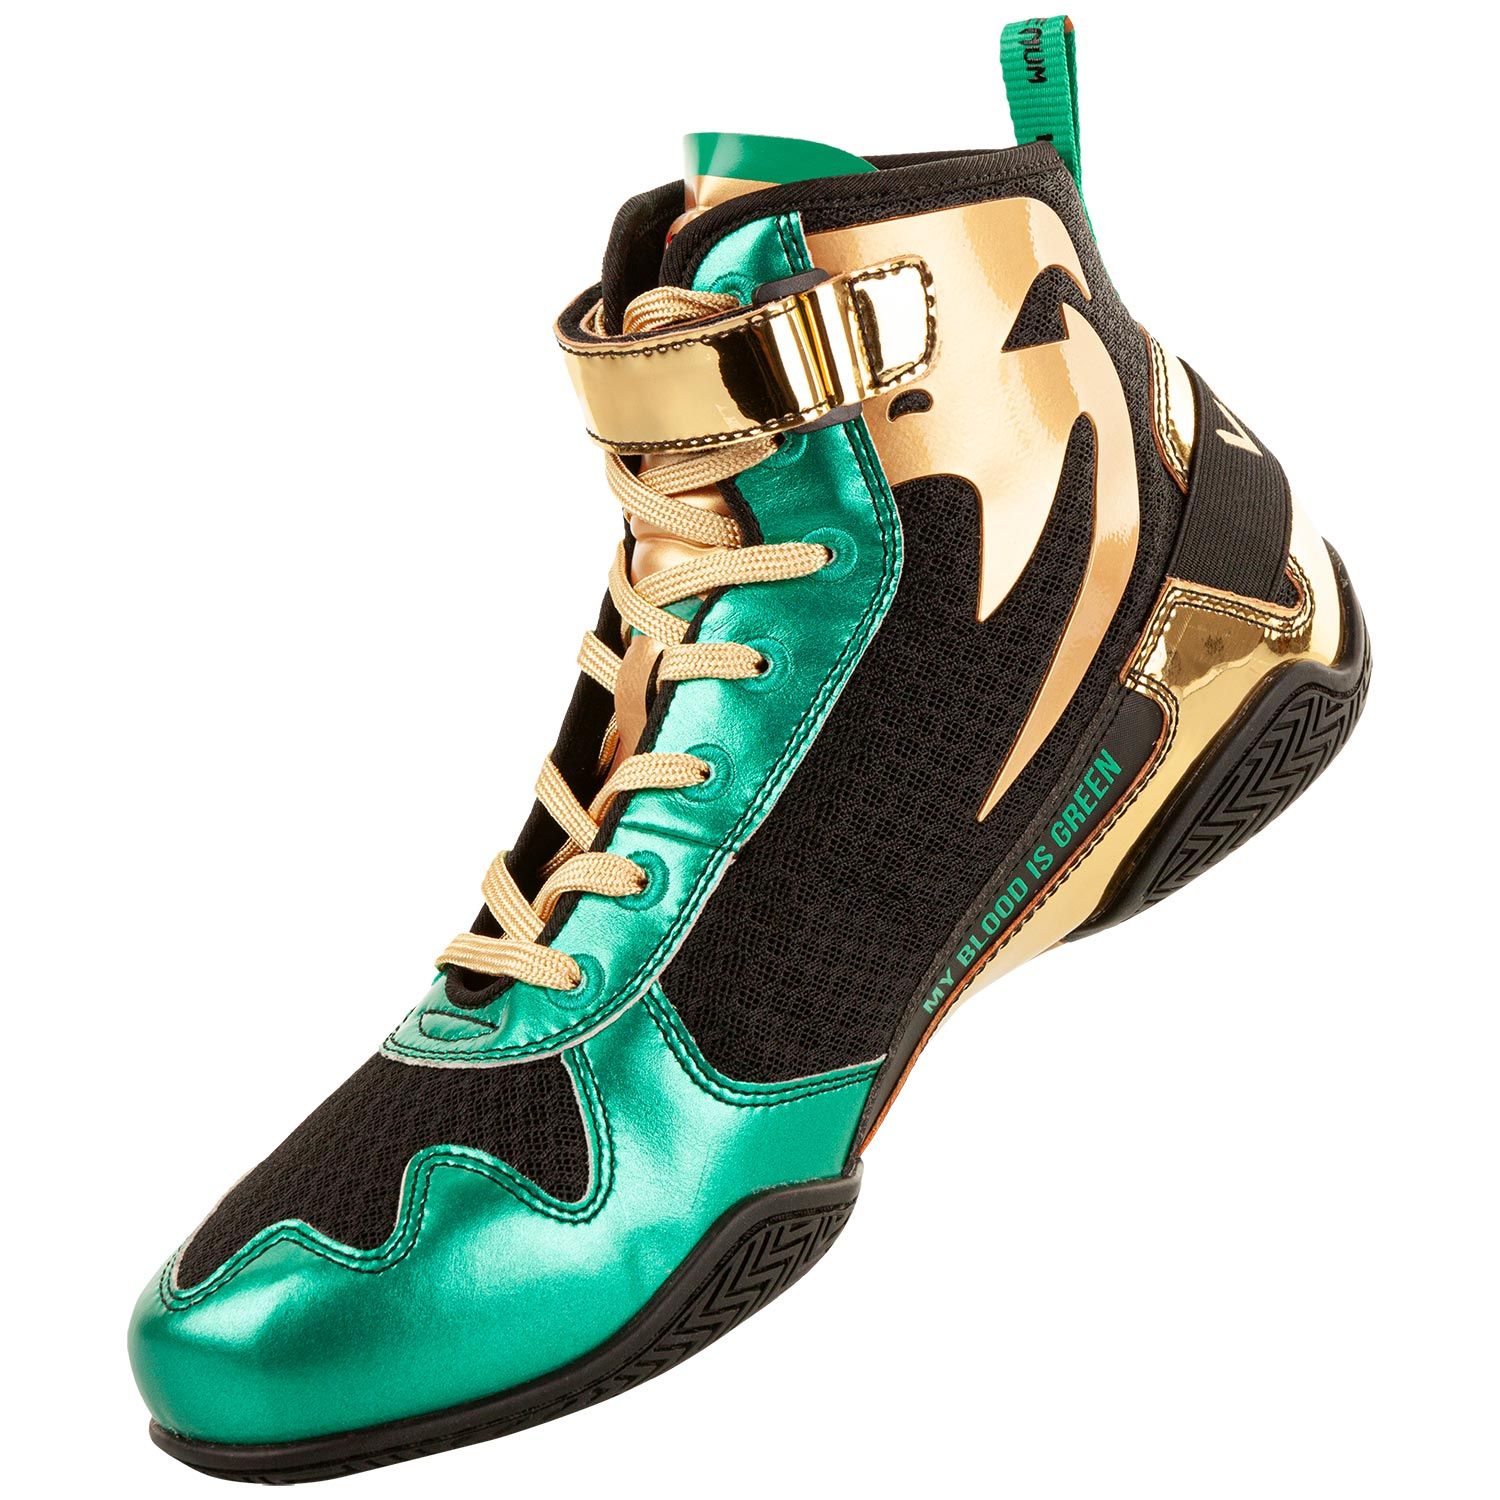 Venum Giant Low Boxing Shoes WBC Limited Edition Green